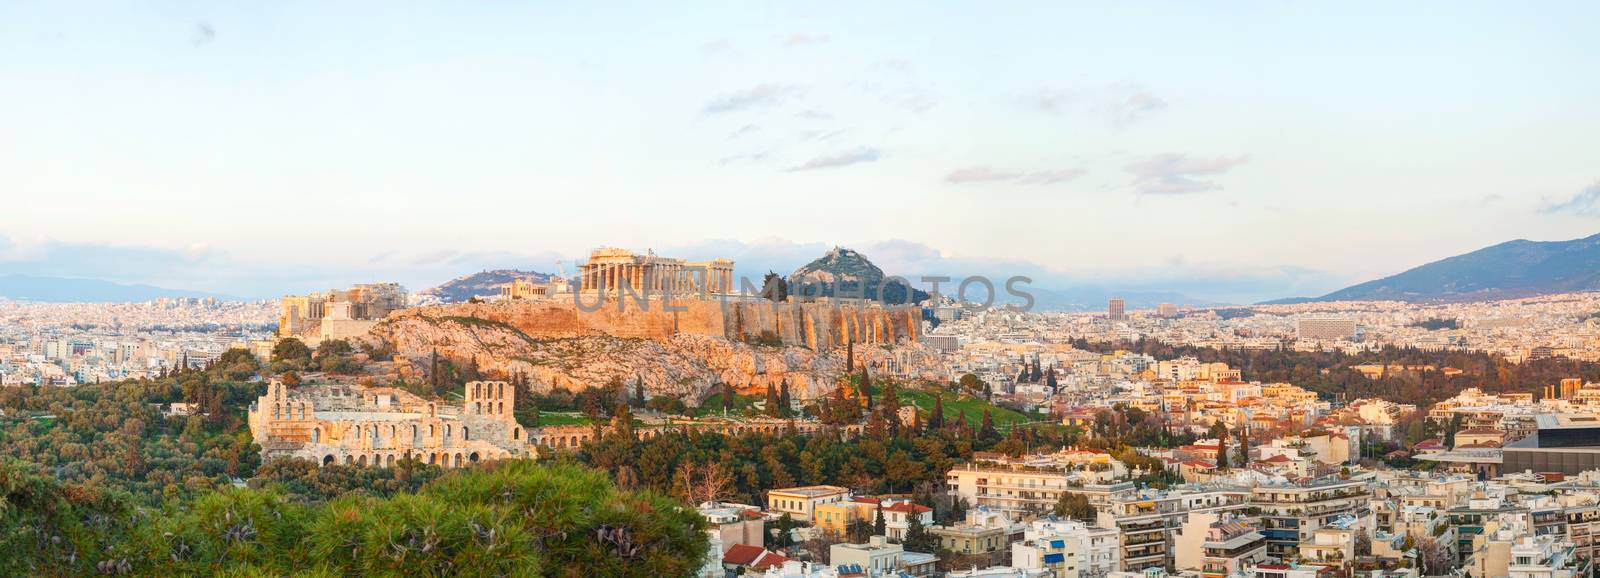 Acropolis in the morning after sunrise in Athens, Greece